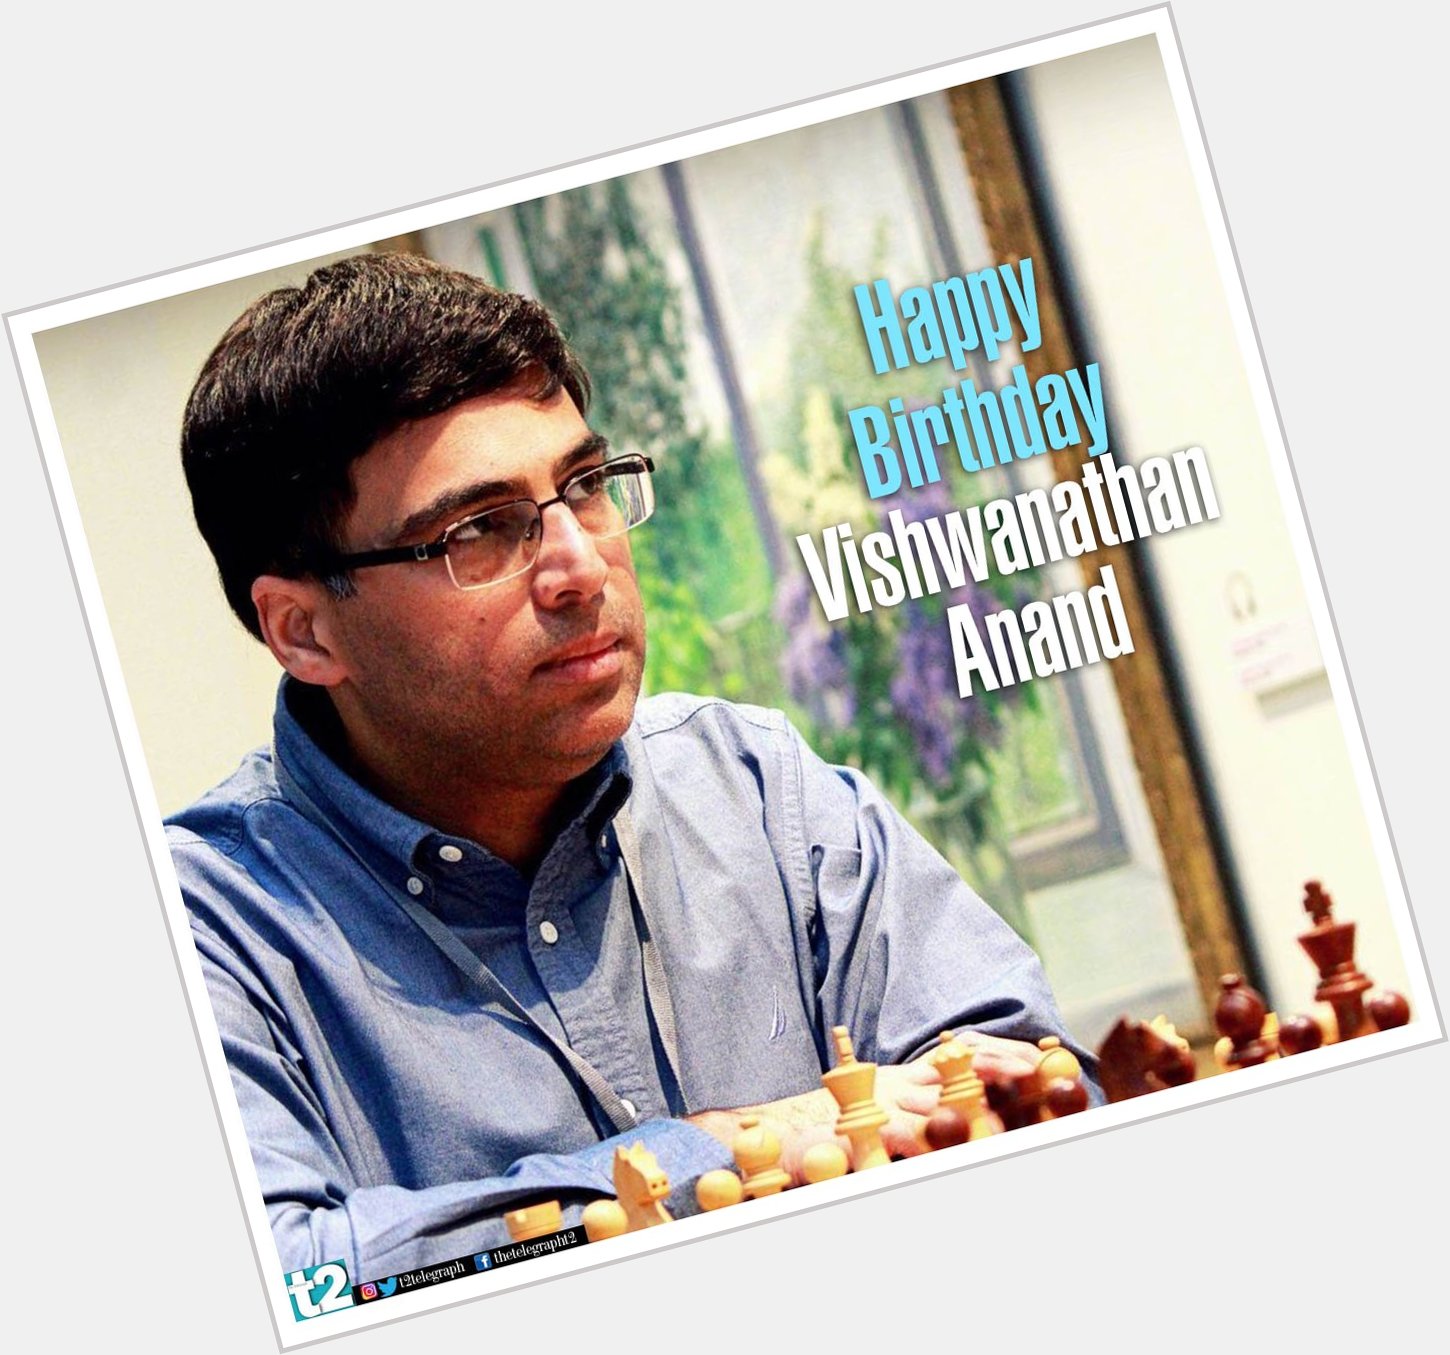 Happy birthday to the king of 64 squares, Viswanathan Anand. 